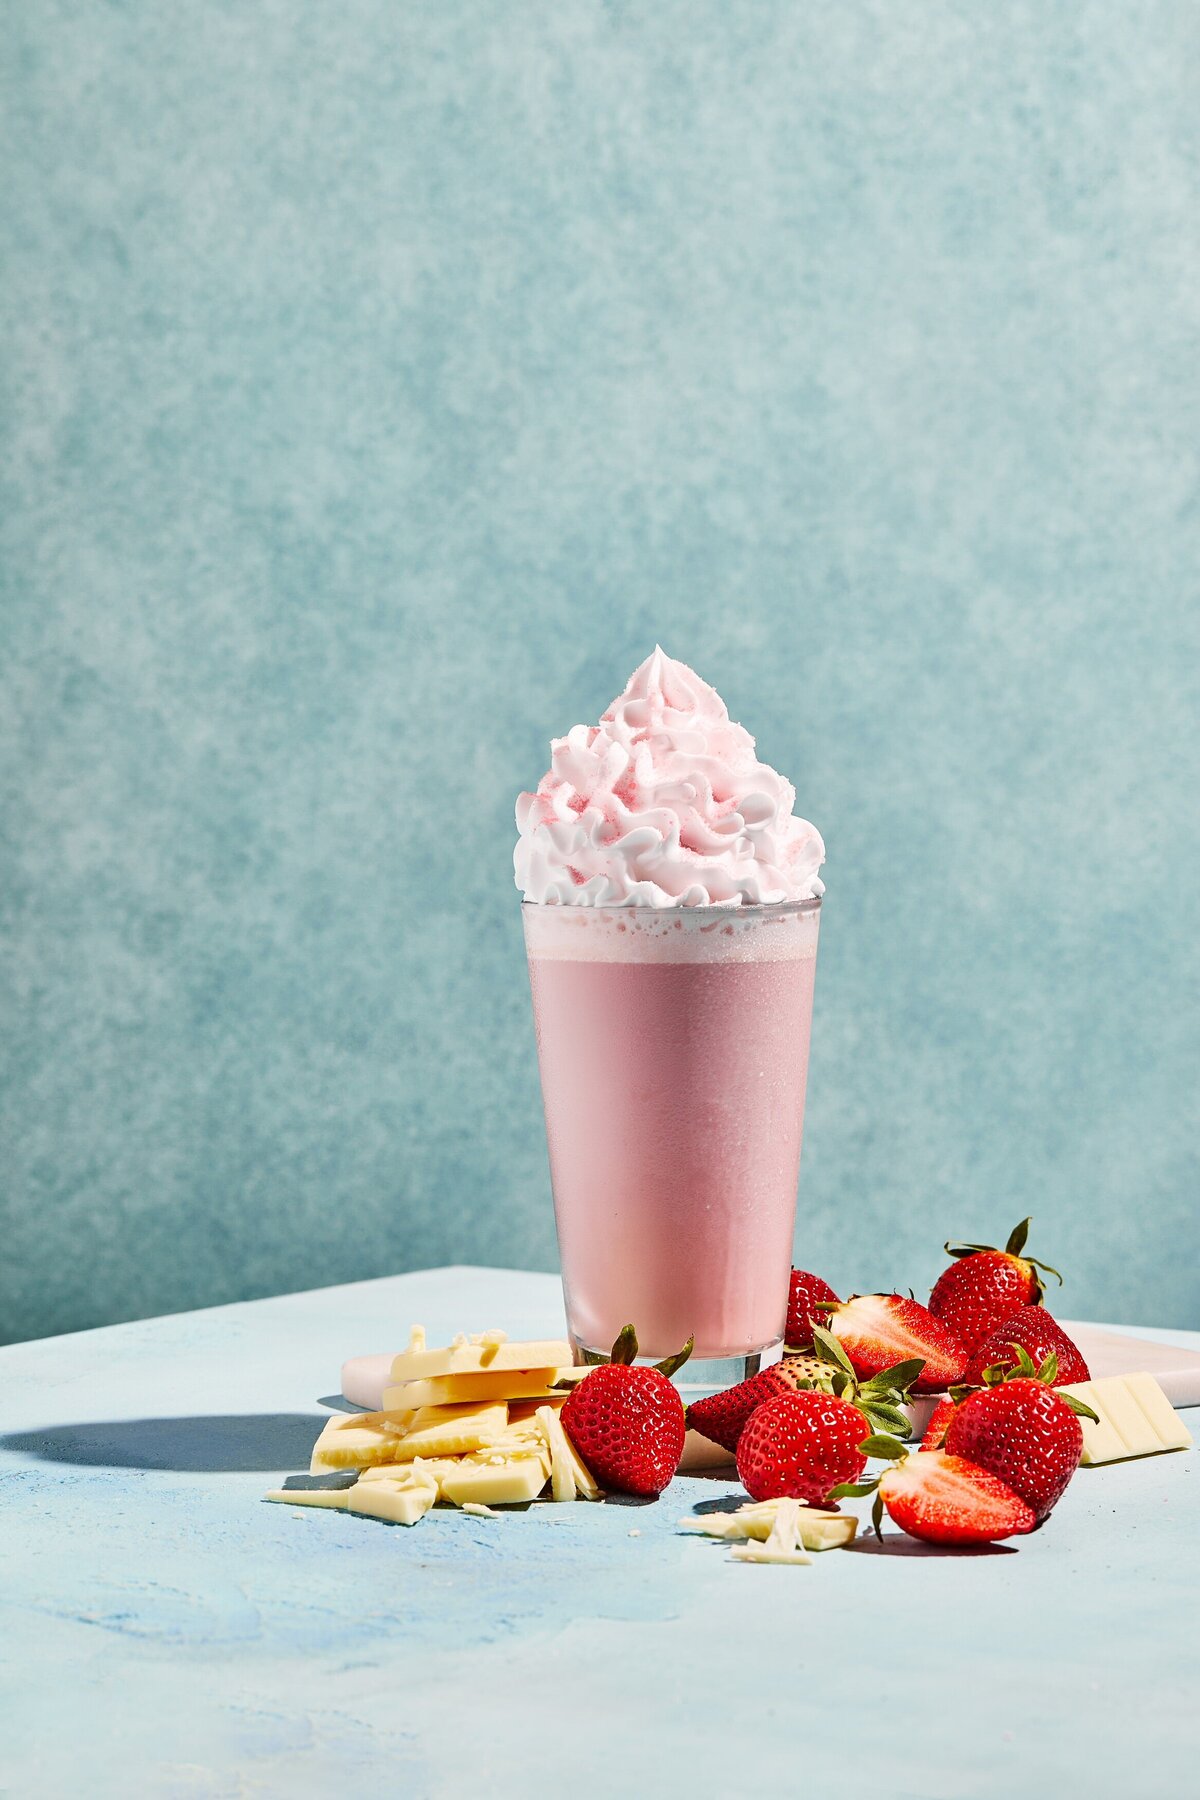 A strawberry milkshake with whipped cream on top and strawberries and bananas in front of it.